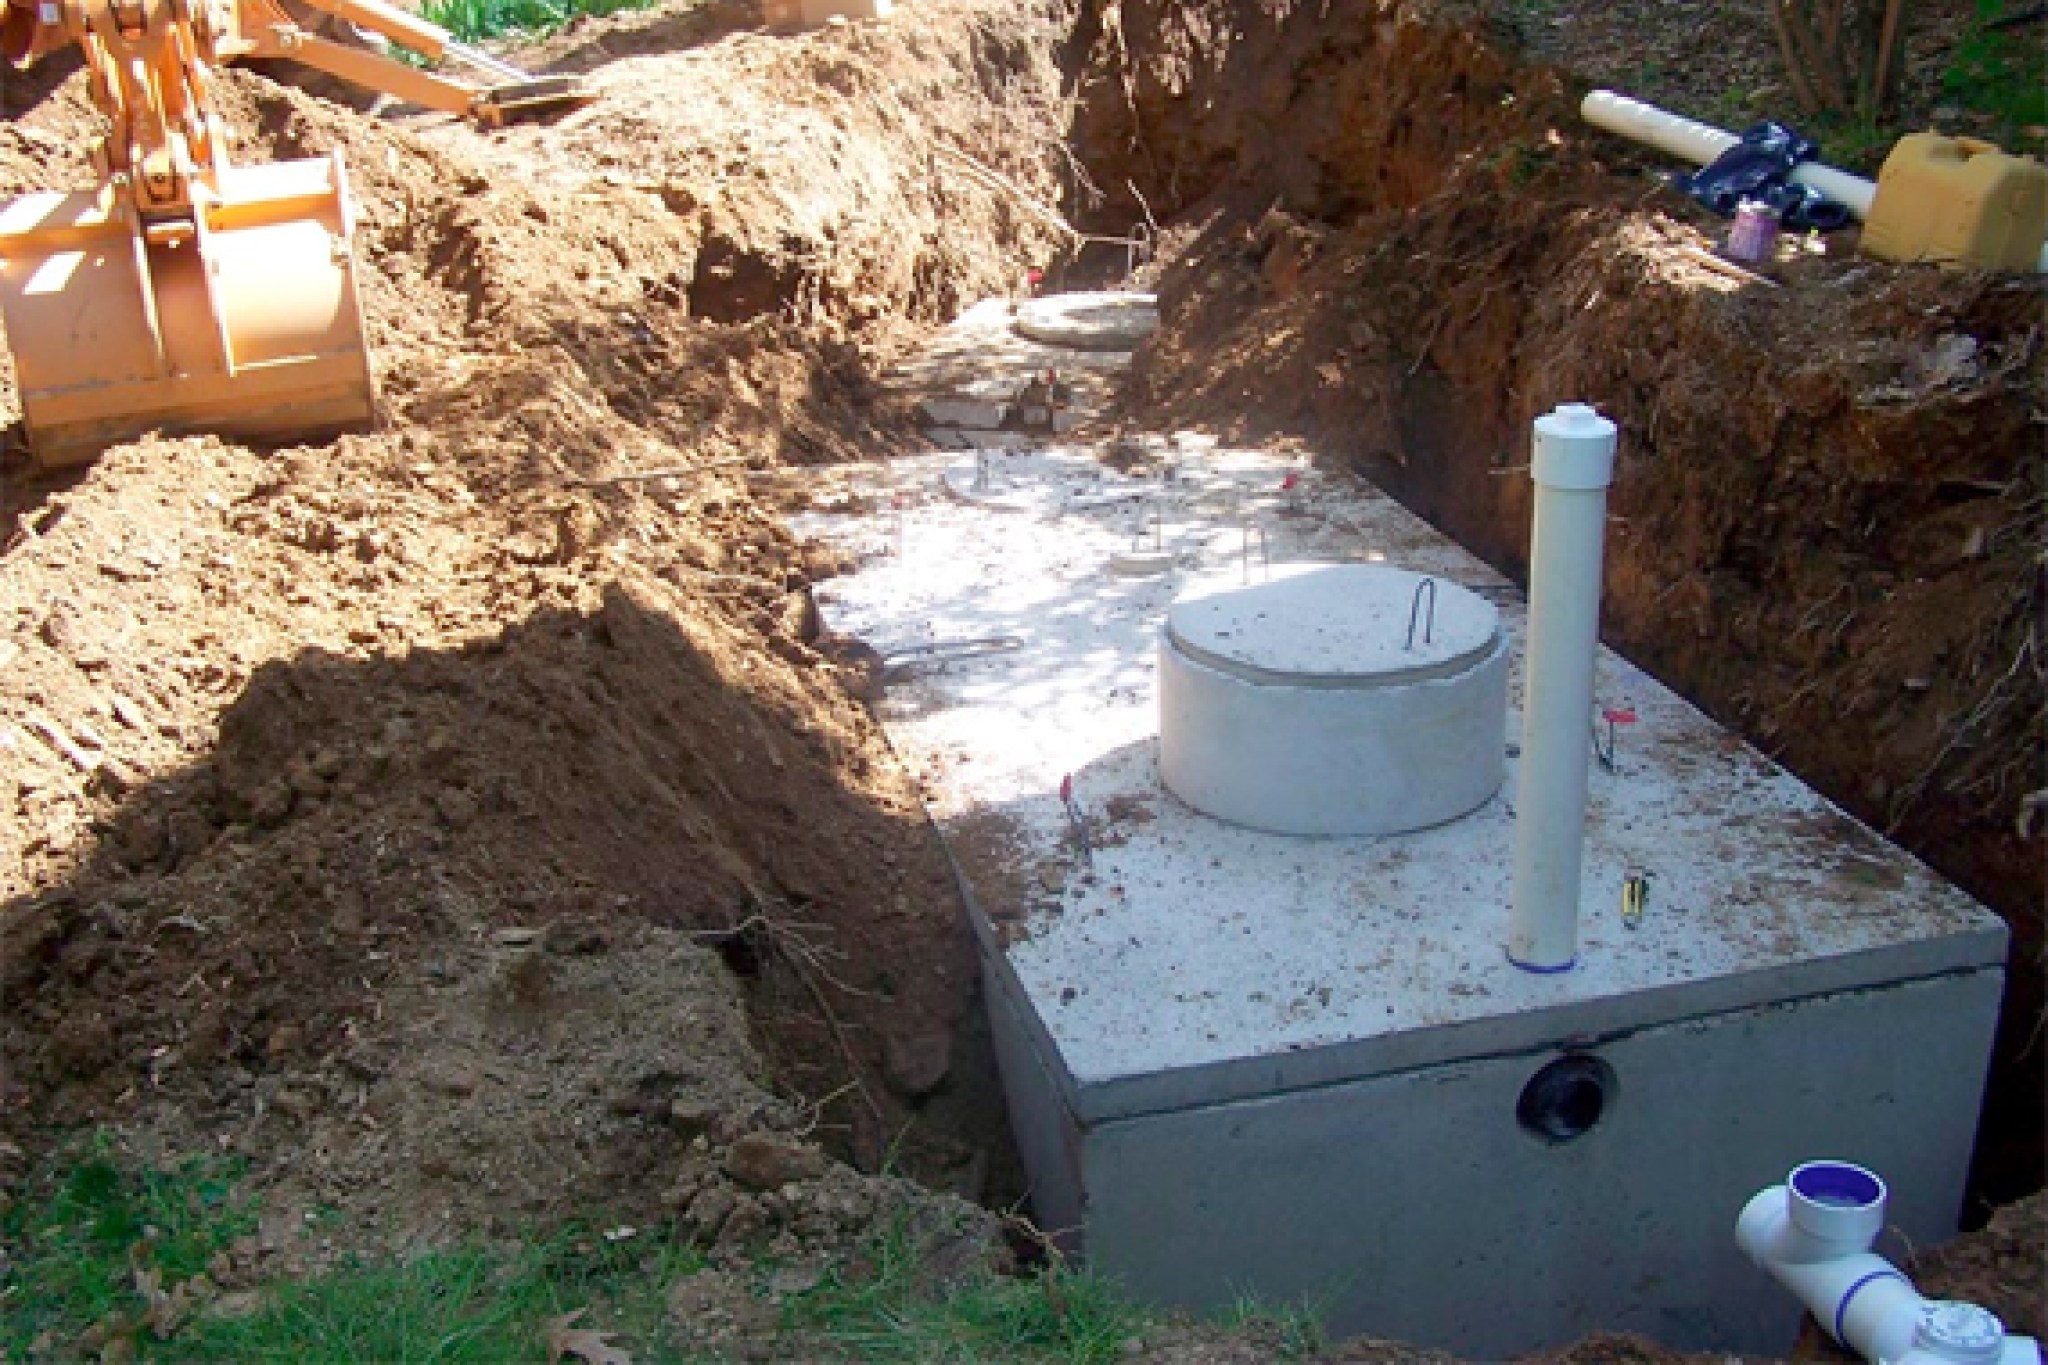 Septic Tanks & Insurance  Are Septic Tank Systems Covered?